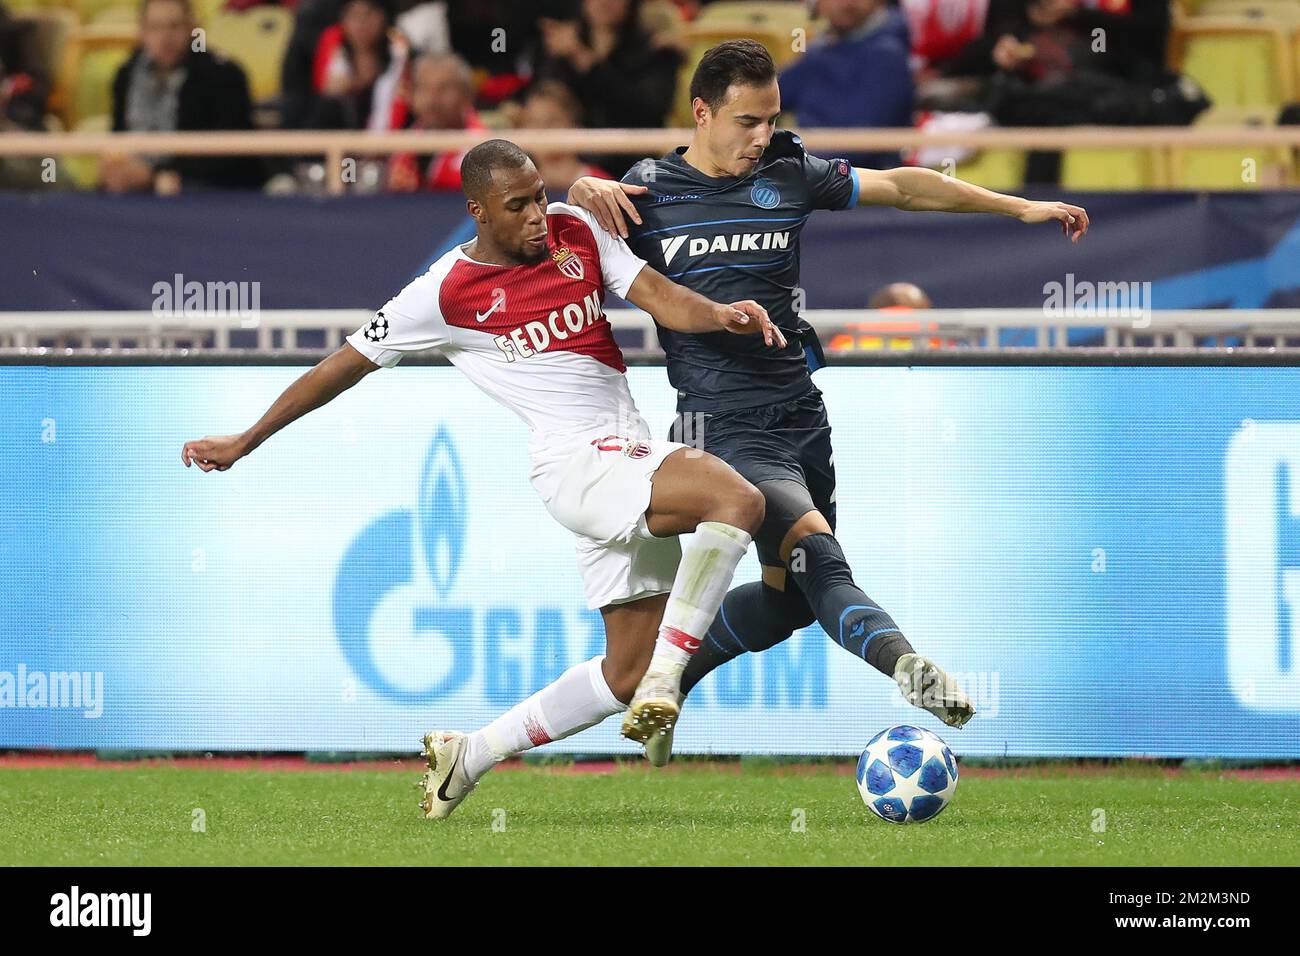 Monaco's Djibril Sidibe and Club's Dion Cools fight for the ball during a  game between AS Monaco and Belgian soccer team Club Brugge KV in the  Principality of Monaco, Tuesday 06 November